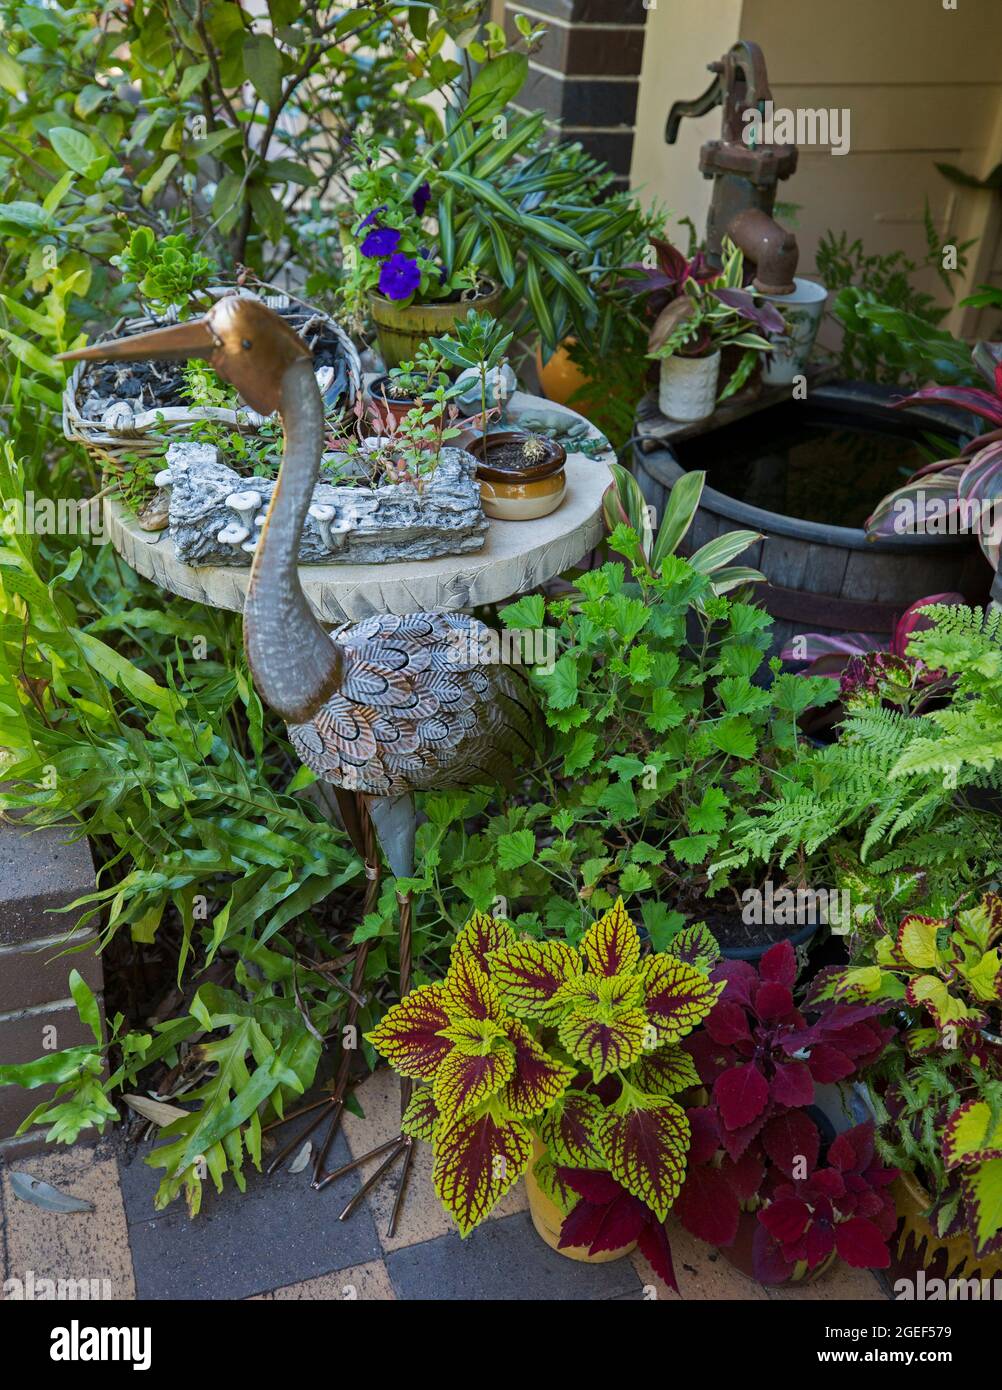 Metal statue of heron among pot plants, including coleus, with colourful foliage, beside a small pool in an indoor garden, in Australa. Stock Photo